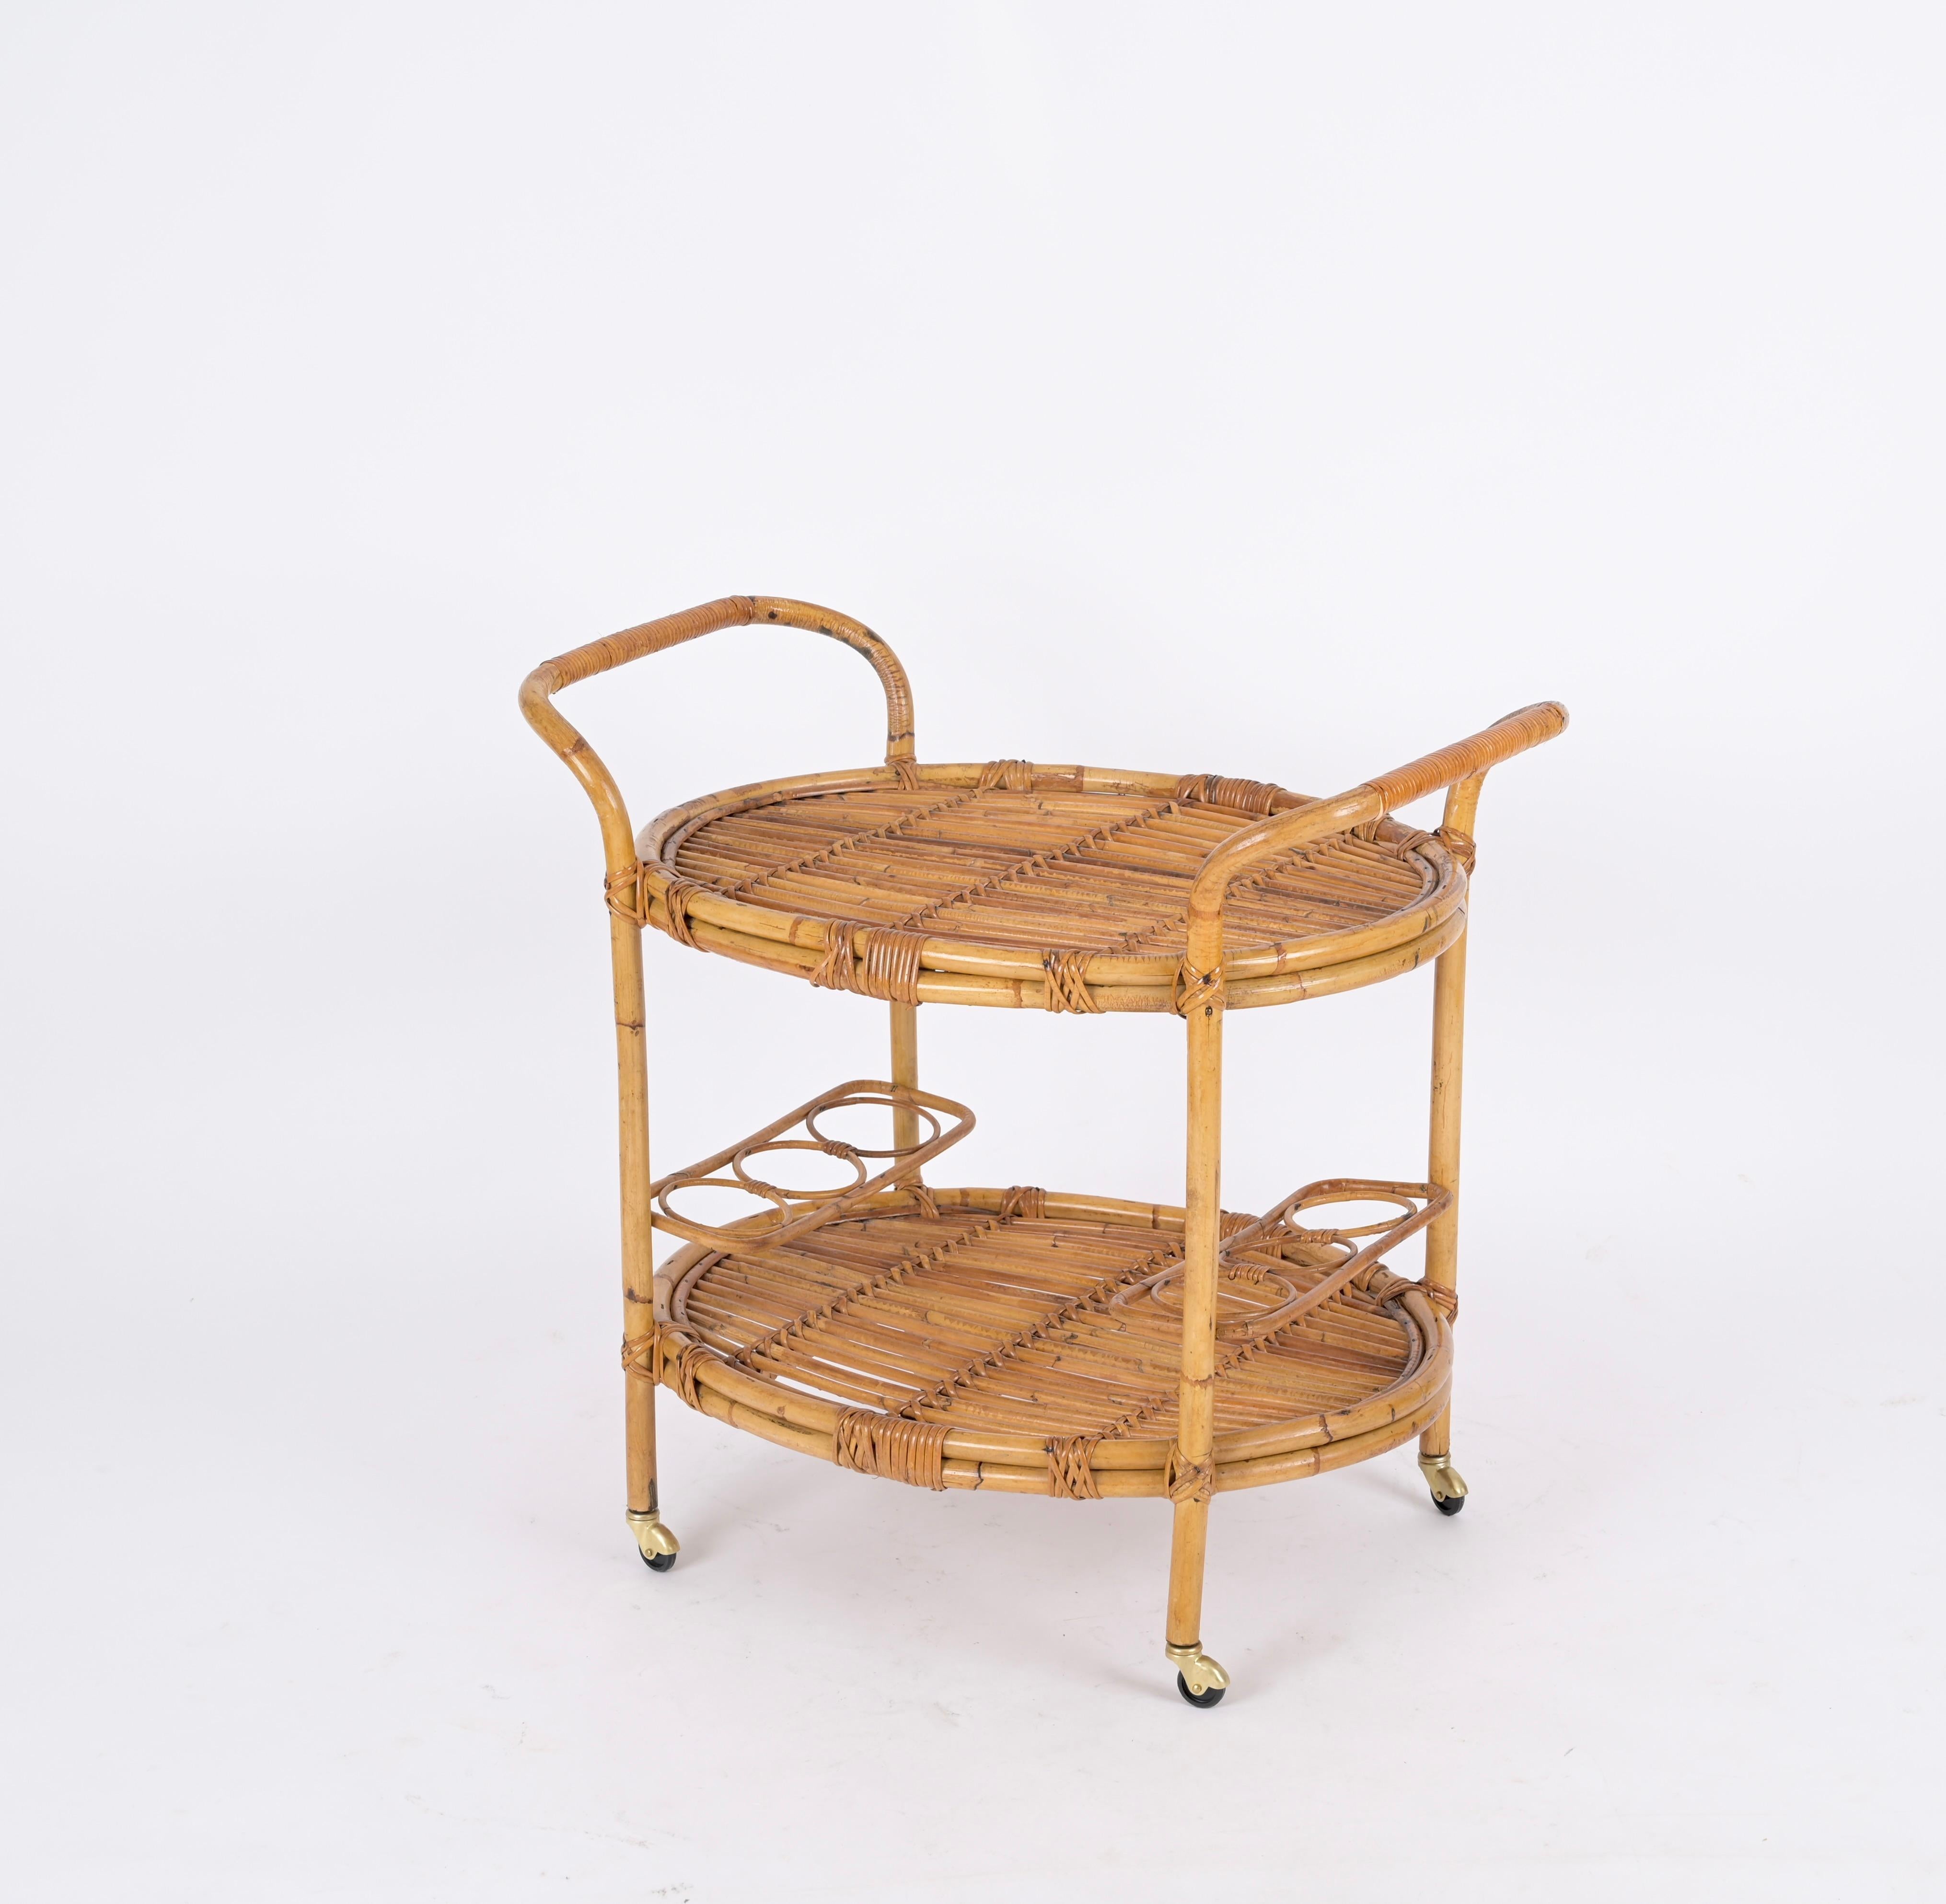 Marvellous mid-century oval bar cart trolley fully made in bamboo, curved rattan and wicker. This unique piece was hand-made with perfect proportions, great example of fine Italian craftsmanship from the 60s.

A wonderful piece with incredible